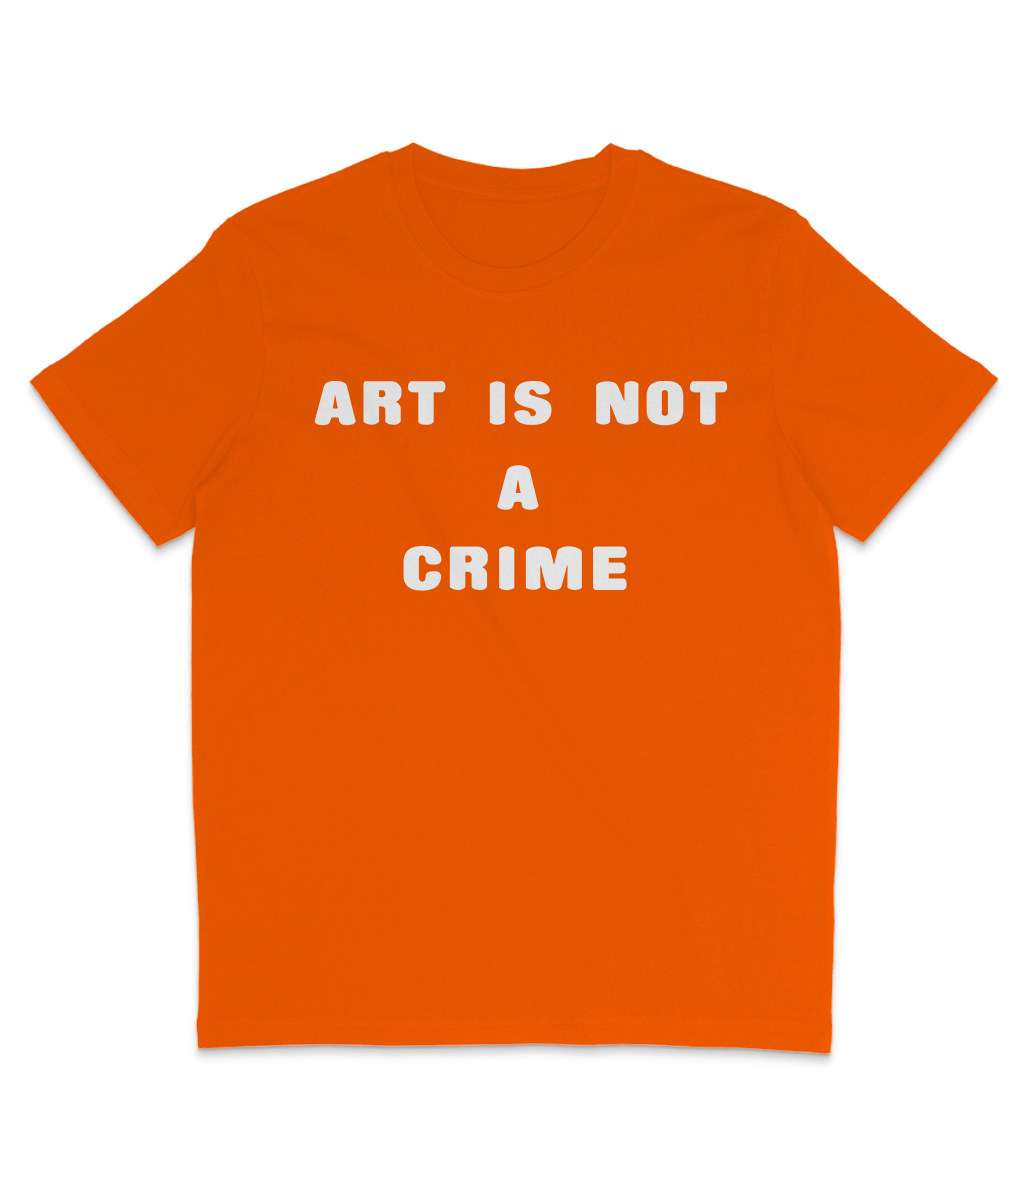 Art Is Not A Crime - Style Wars - 1983